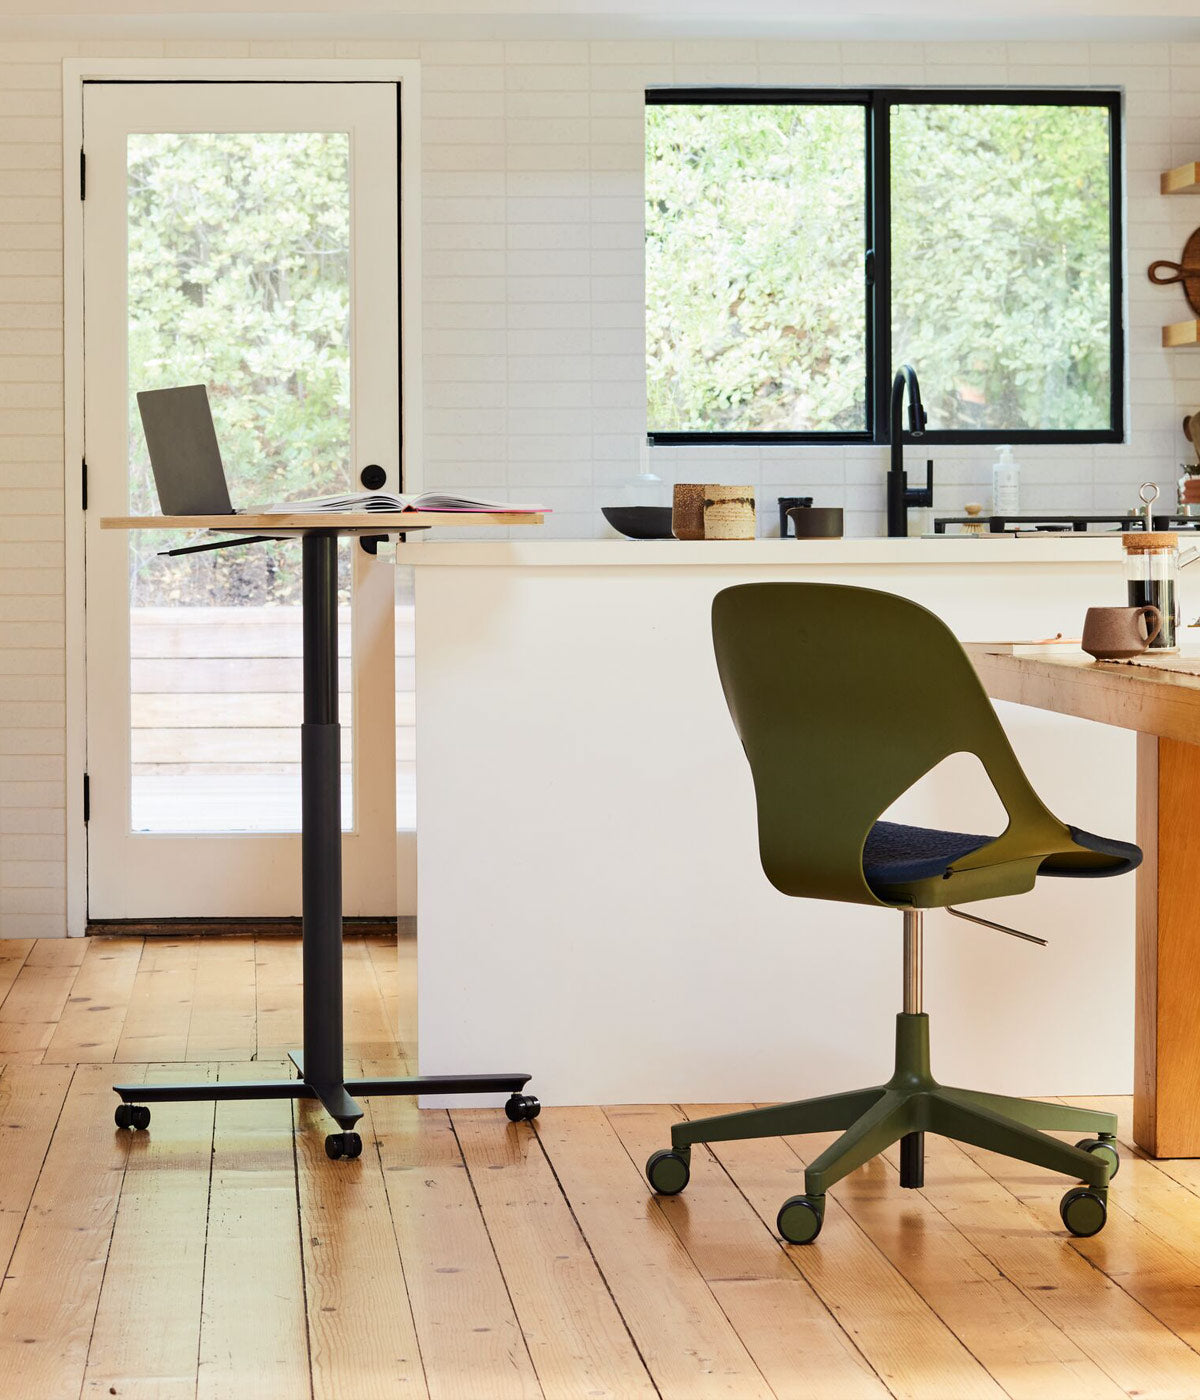 A bright kitchen with a Herman Miller Passport Sit to Stand desk and Zeph chair in olive green